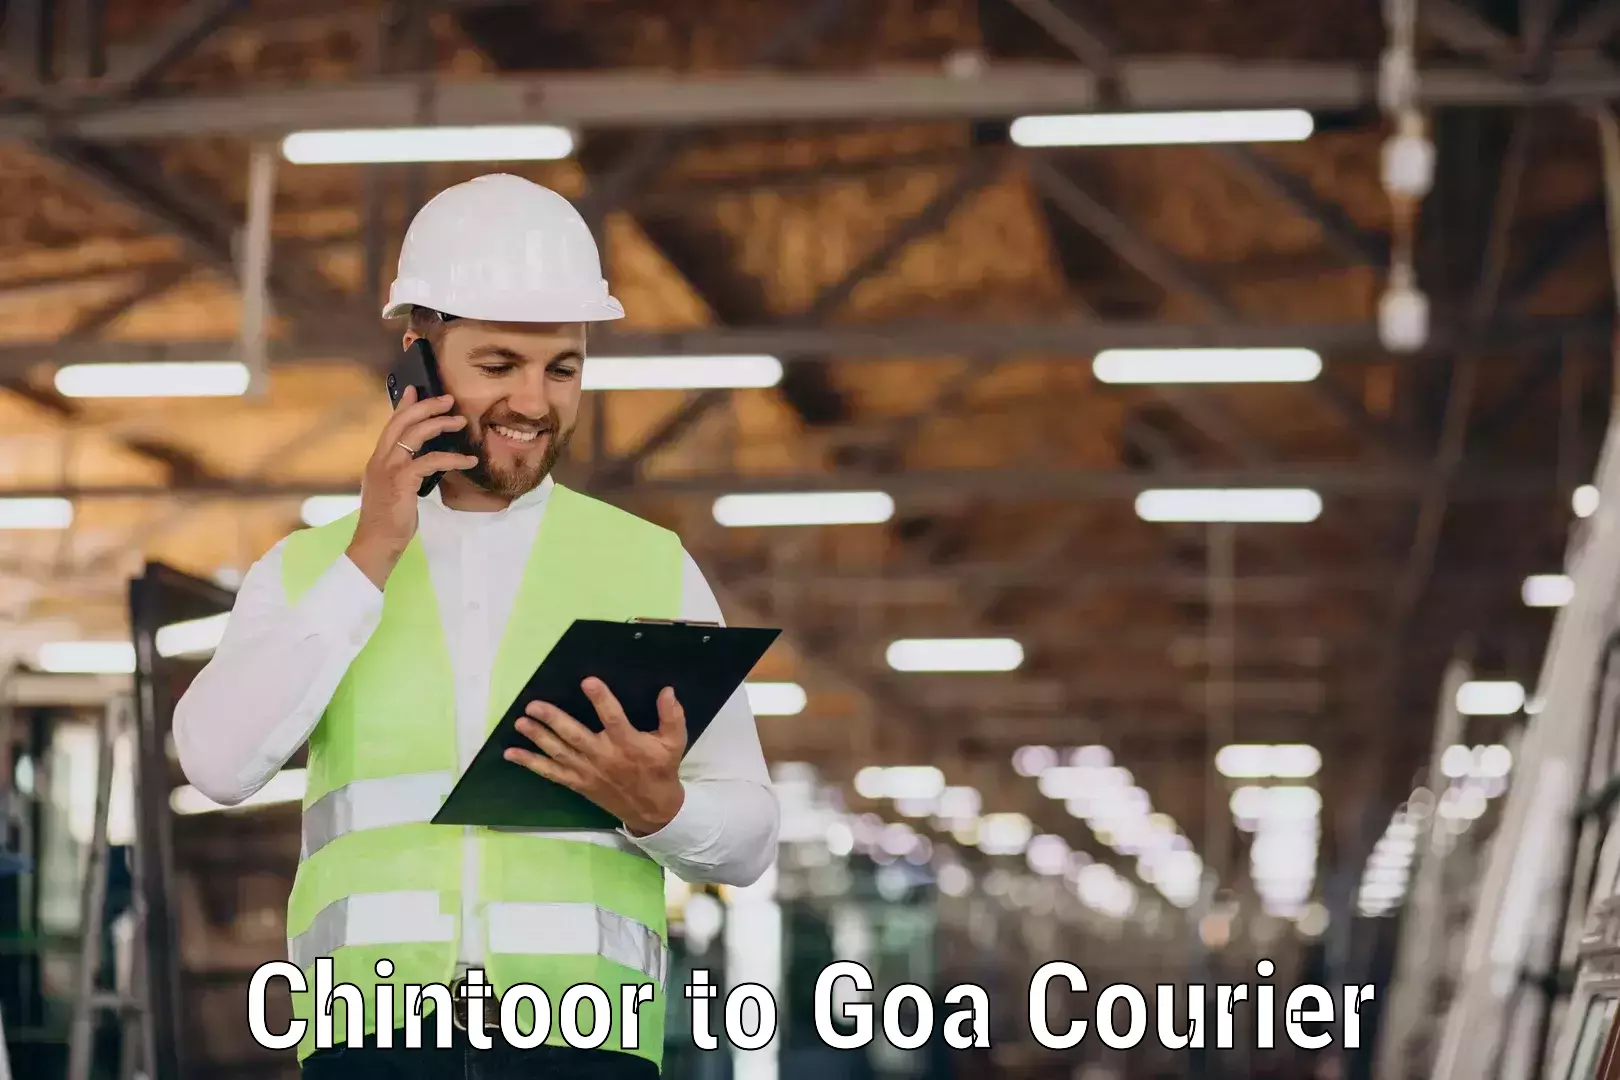 Next-day freight services Chintoor to Mormugao Port